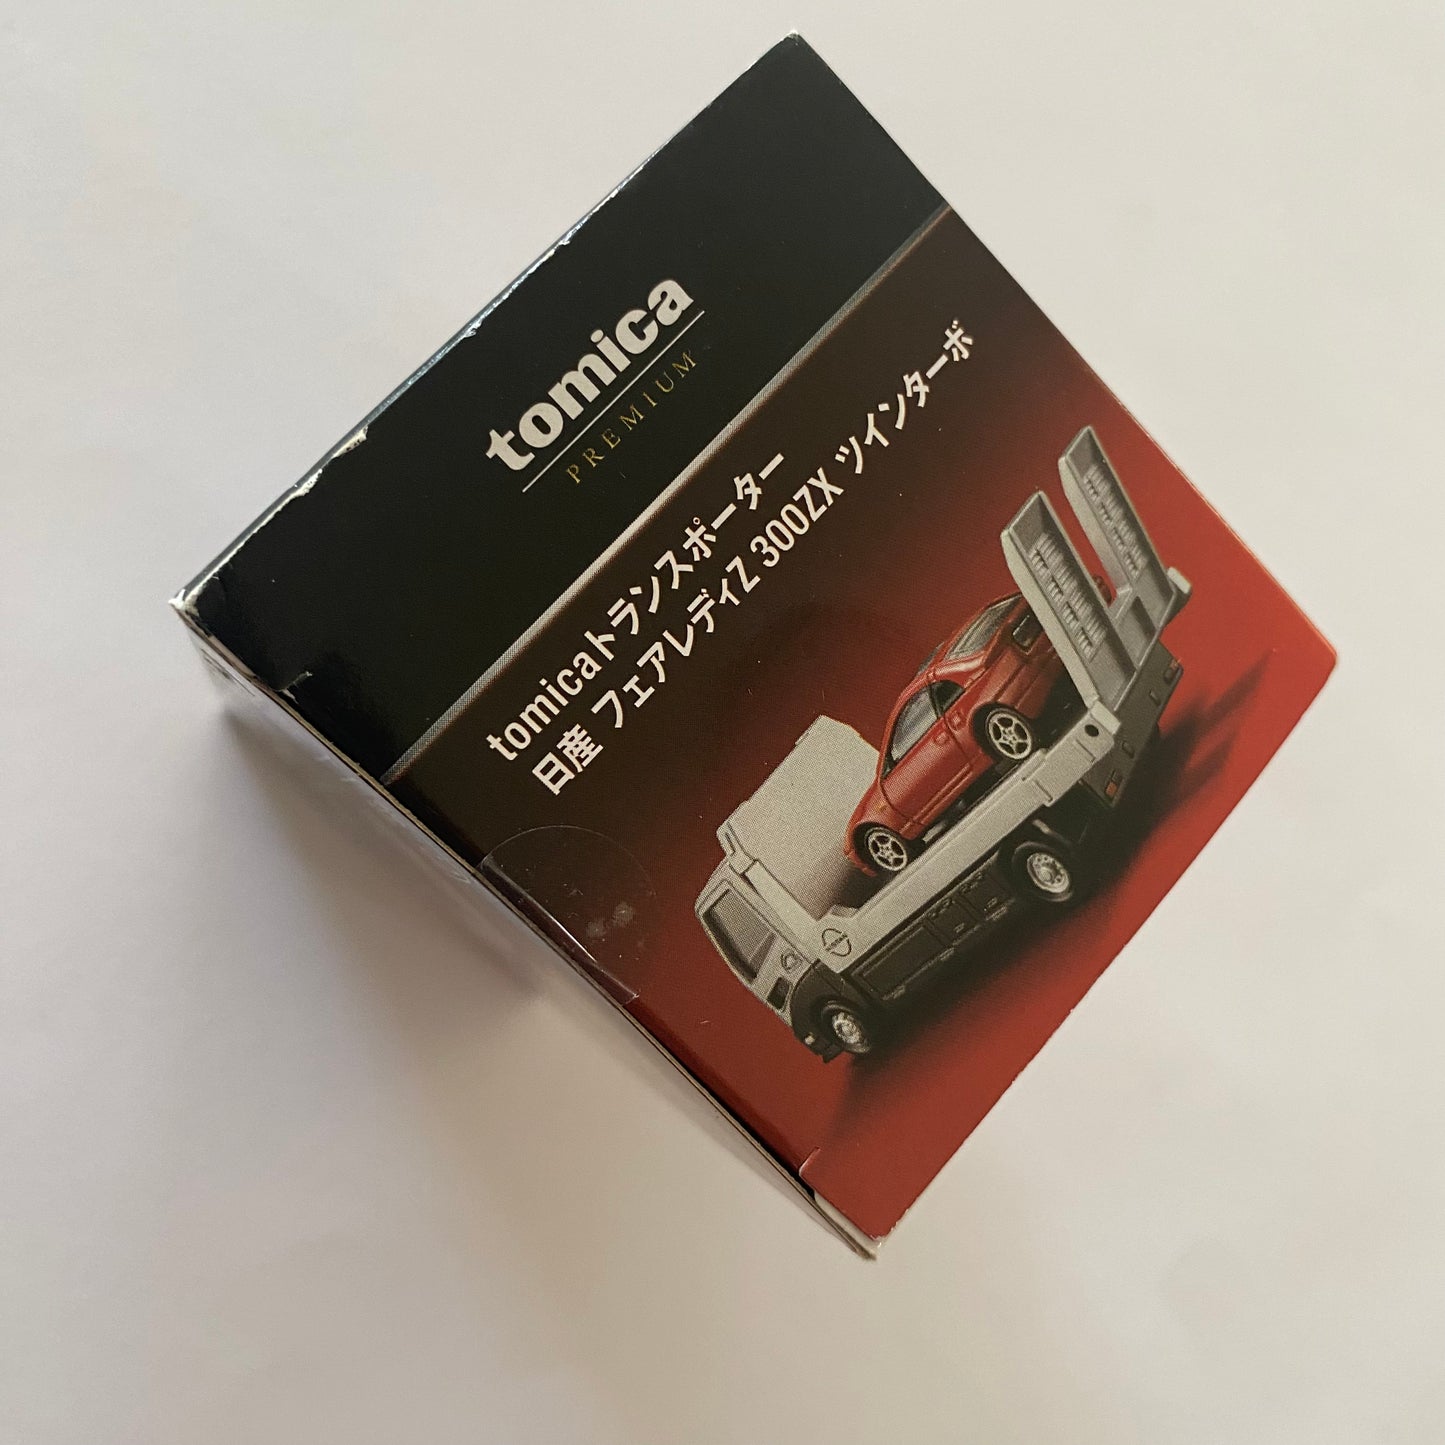 TOMICA Premium Transporter - Nissan 300ZX (Red 1/64* - Boxed not perfect) BA68